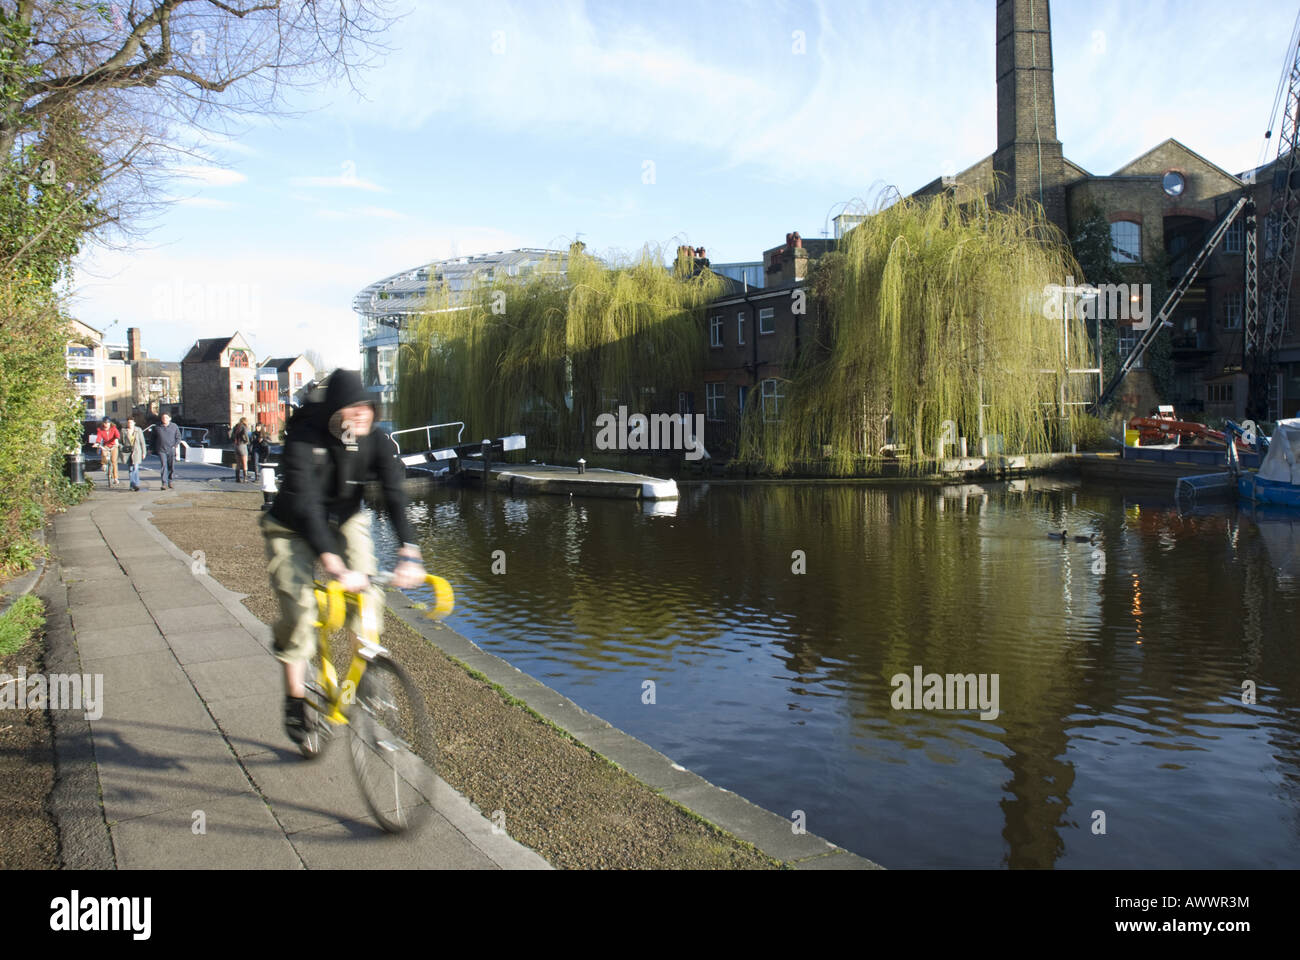 A cyclist rides along a canal in Hackney, east London, UK Stock Photo